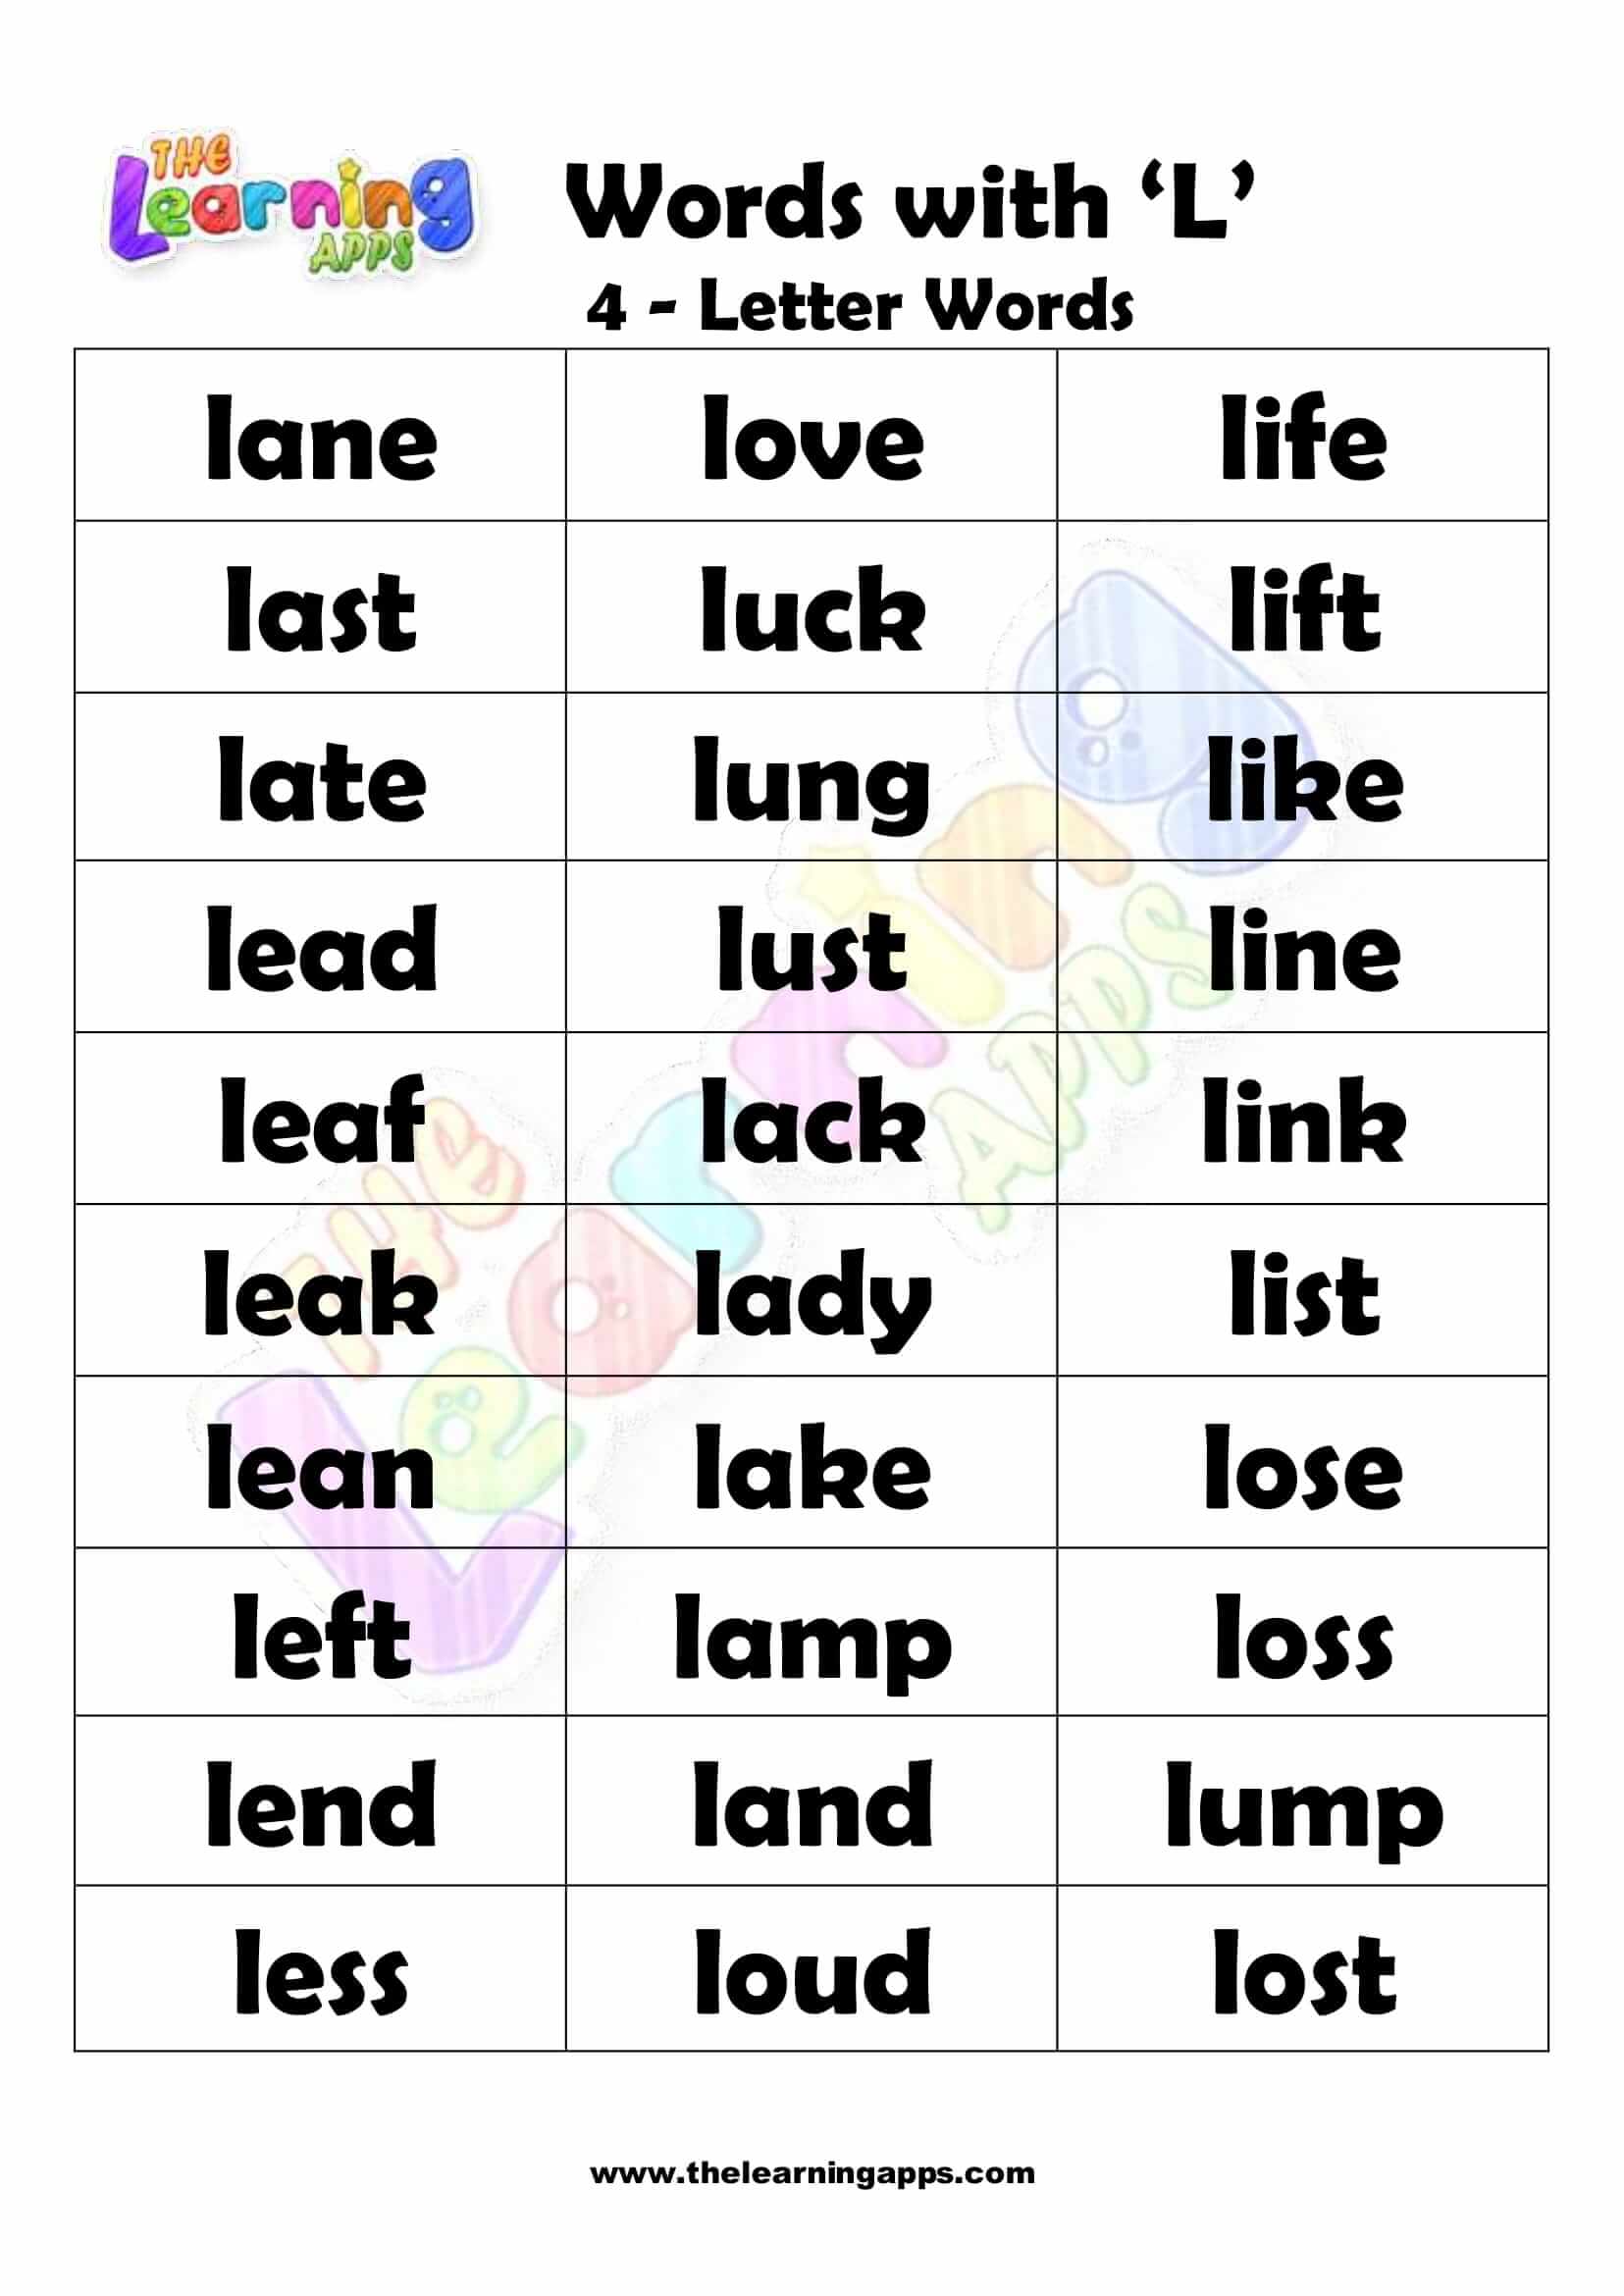 4 LETTER WORD STARTING WITH L